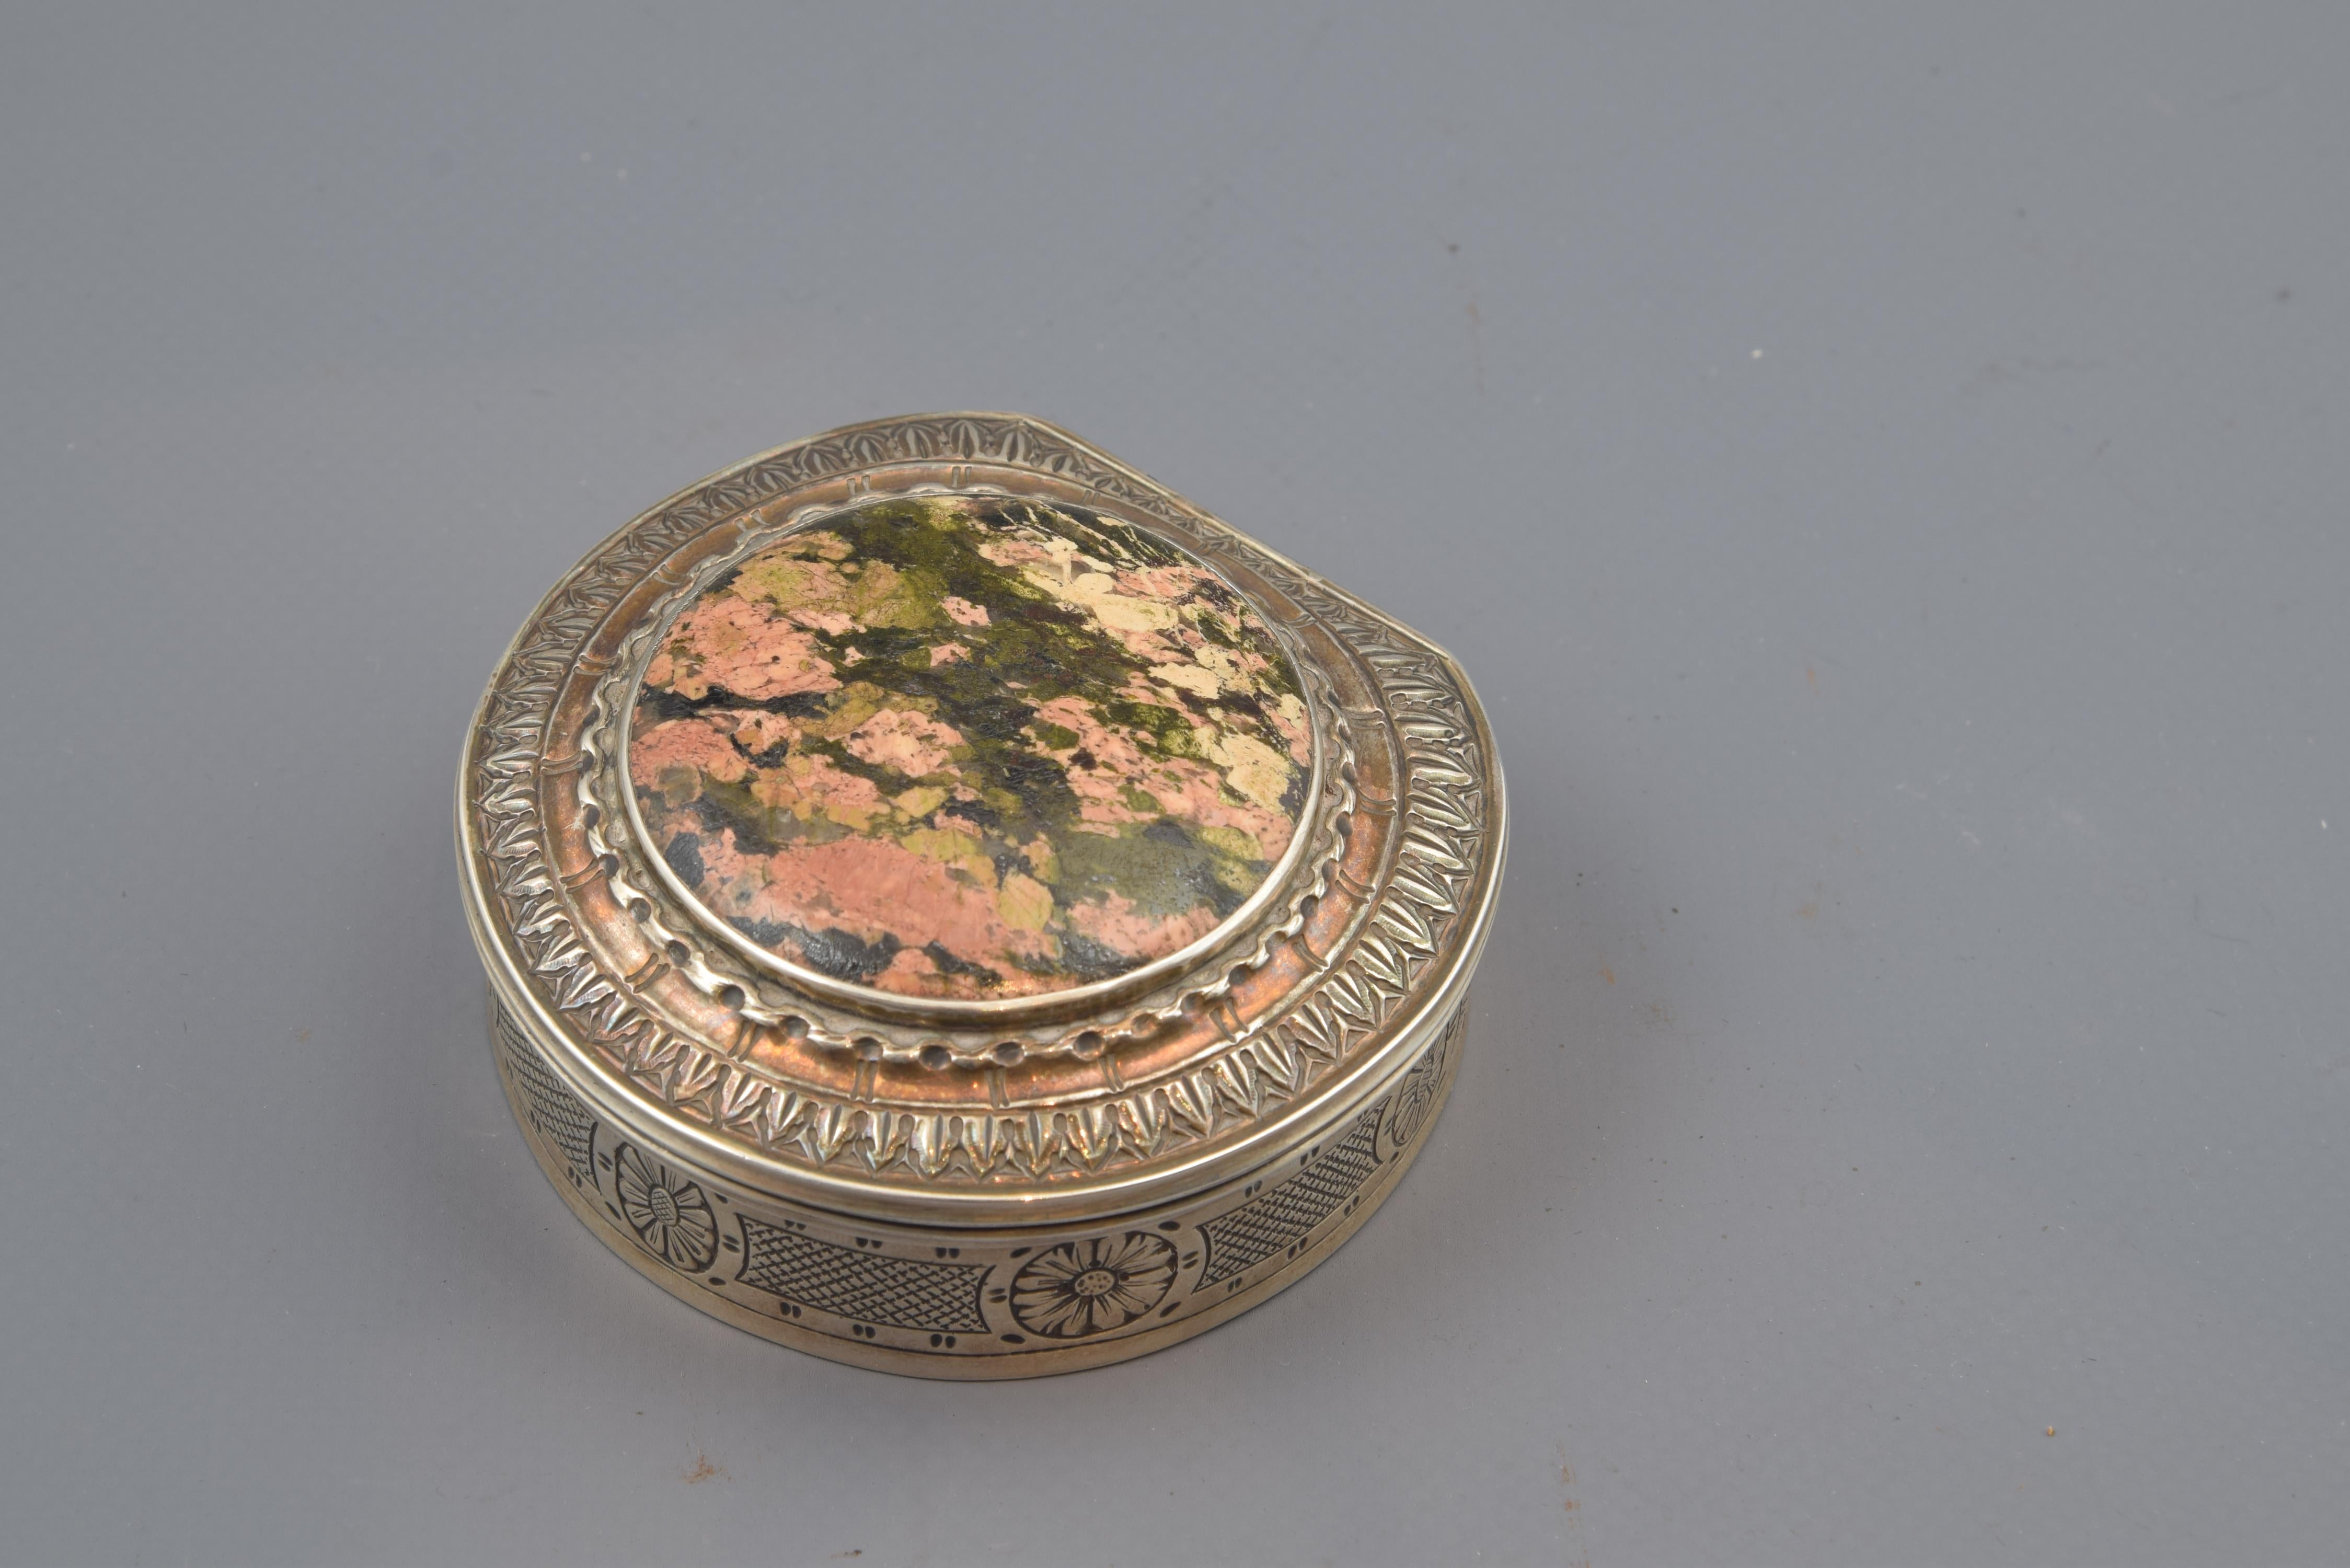 With hallmarks.
Silver box in its almost circular shape with the border decorated with flowers in a band of textile-like lines. The cover has a series of bands of plant elements and others that enhance a polished stone, located in the centre of it.